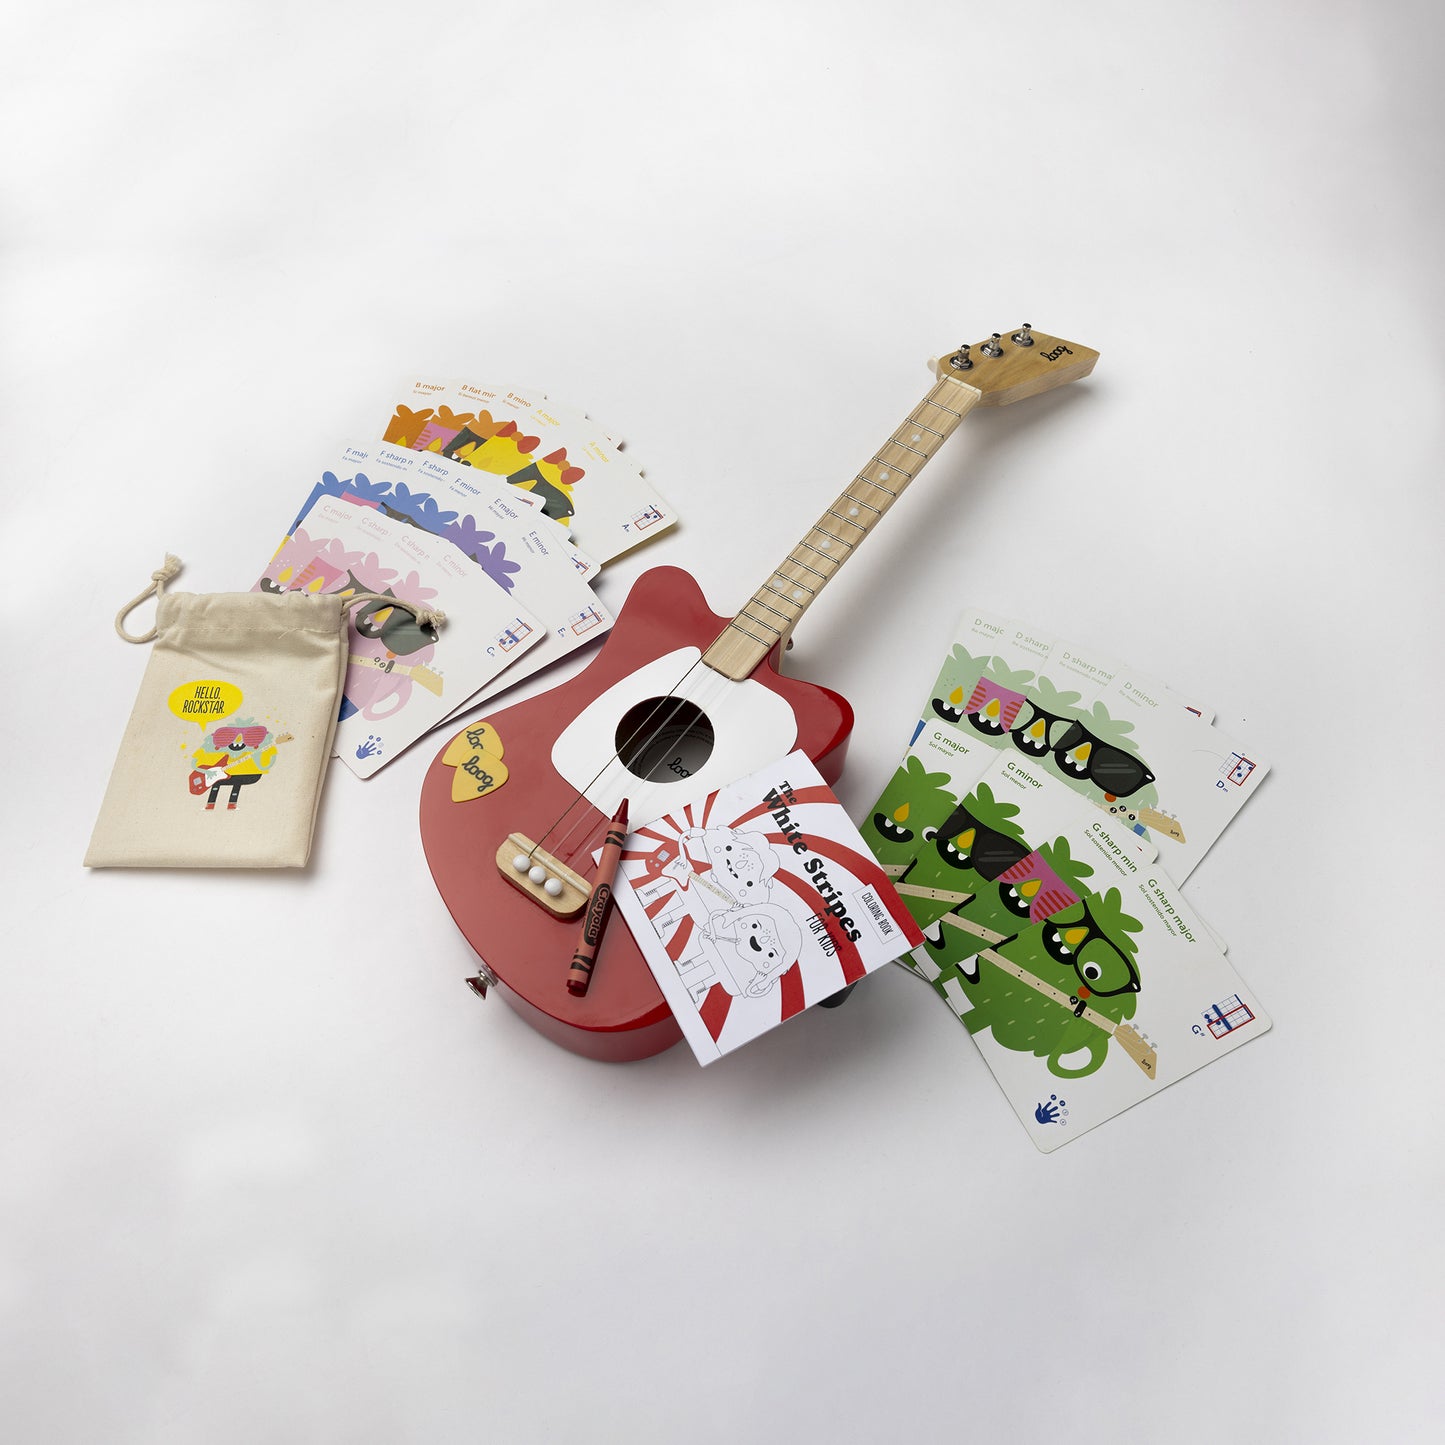 This limited edition of our beloved Loog Mini sports the White Stripes' peppermint logo in the back of the guitar body, comes with a "White Stripes for Kids" coloring book, chord flashcards and app access. We even include a red crayon! 🖍️